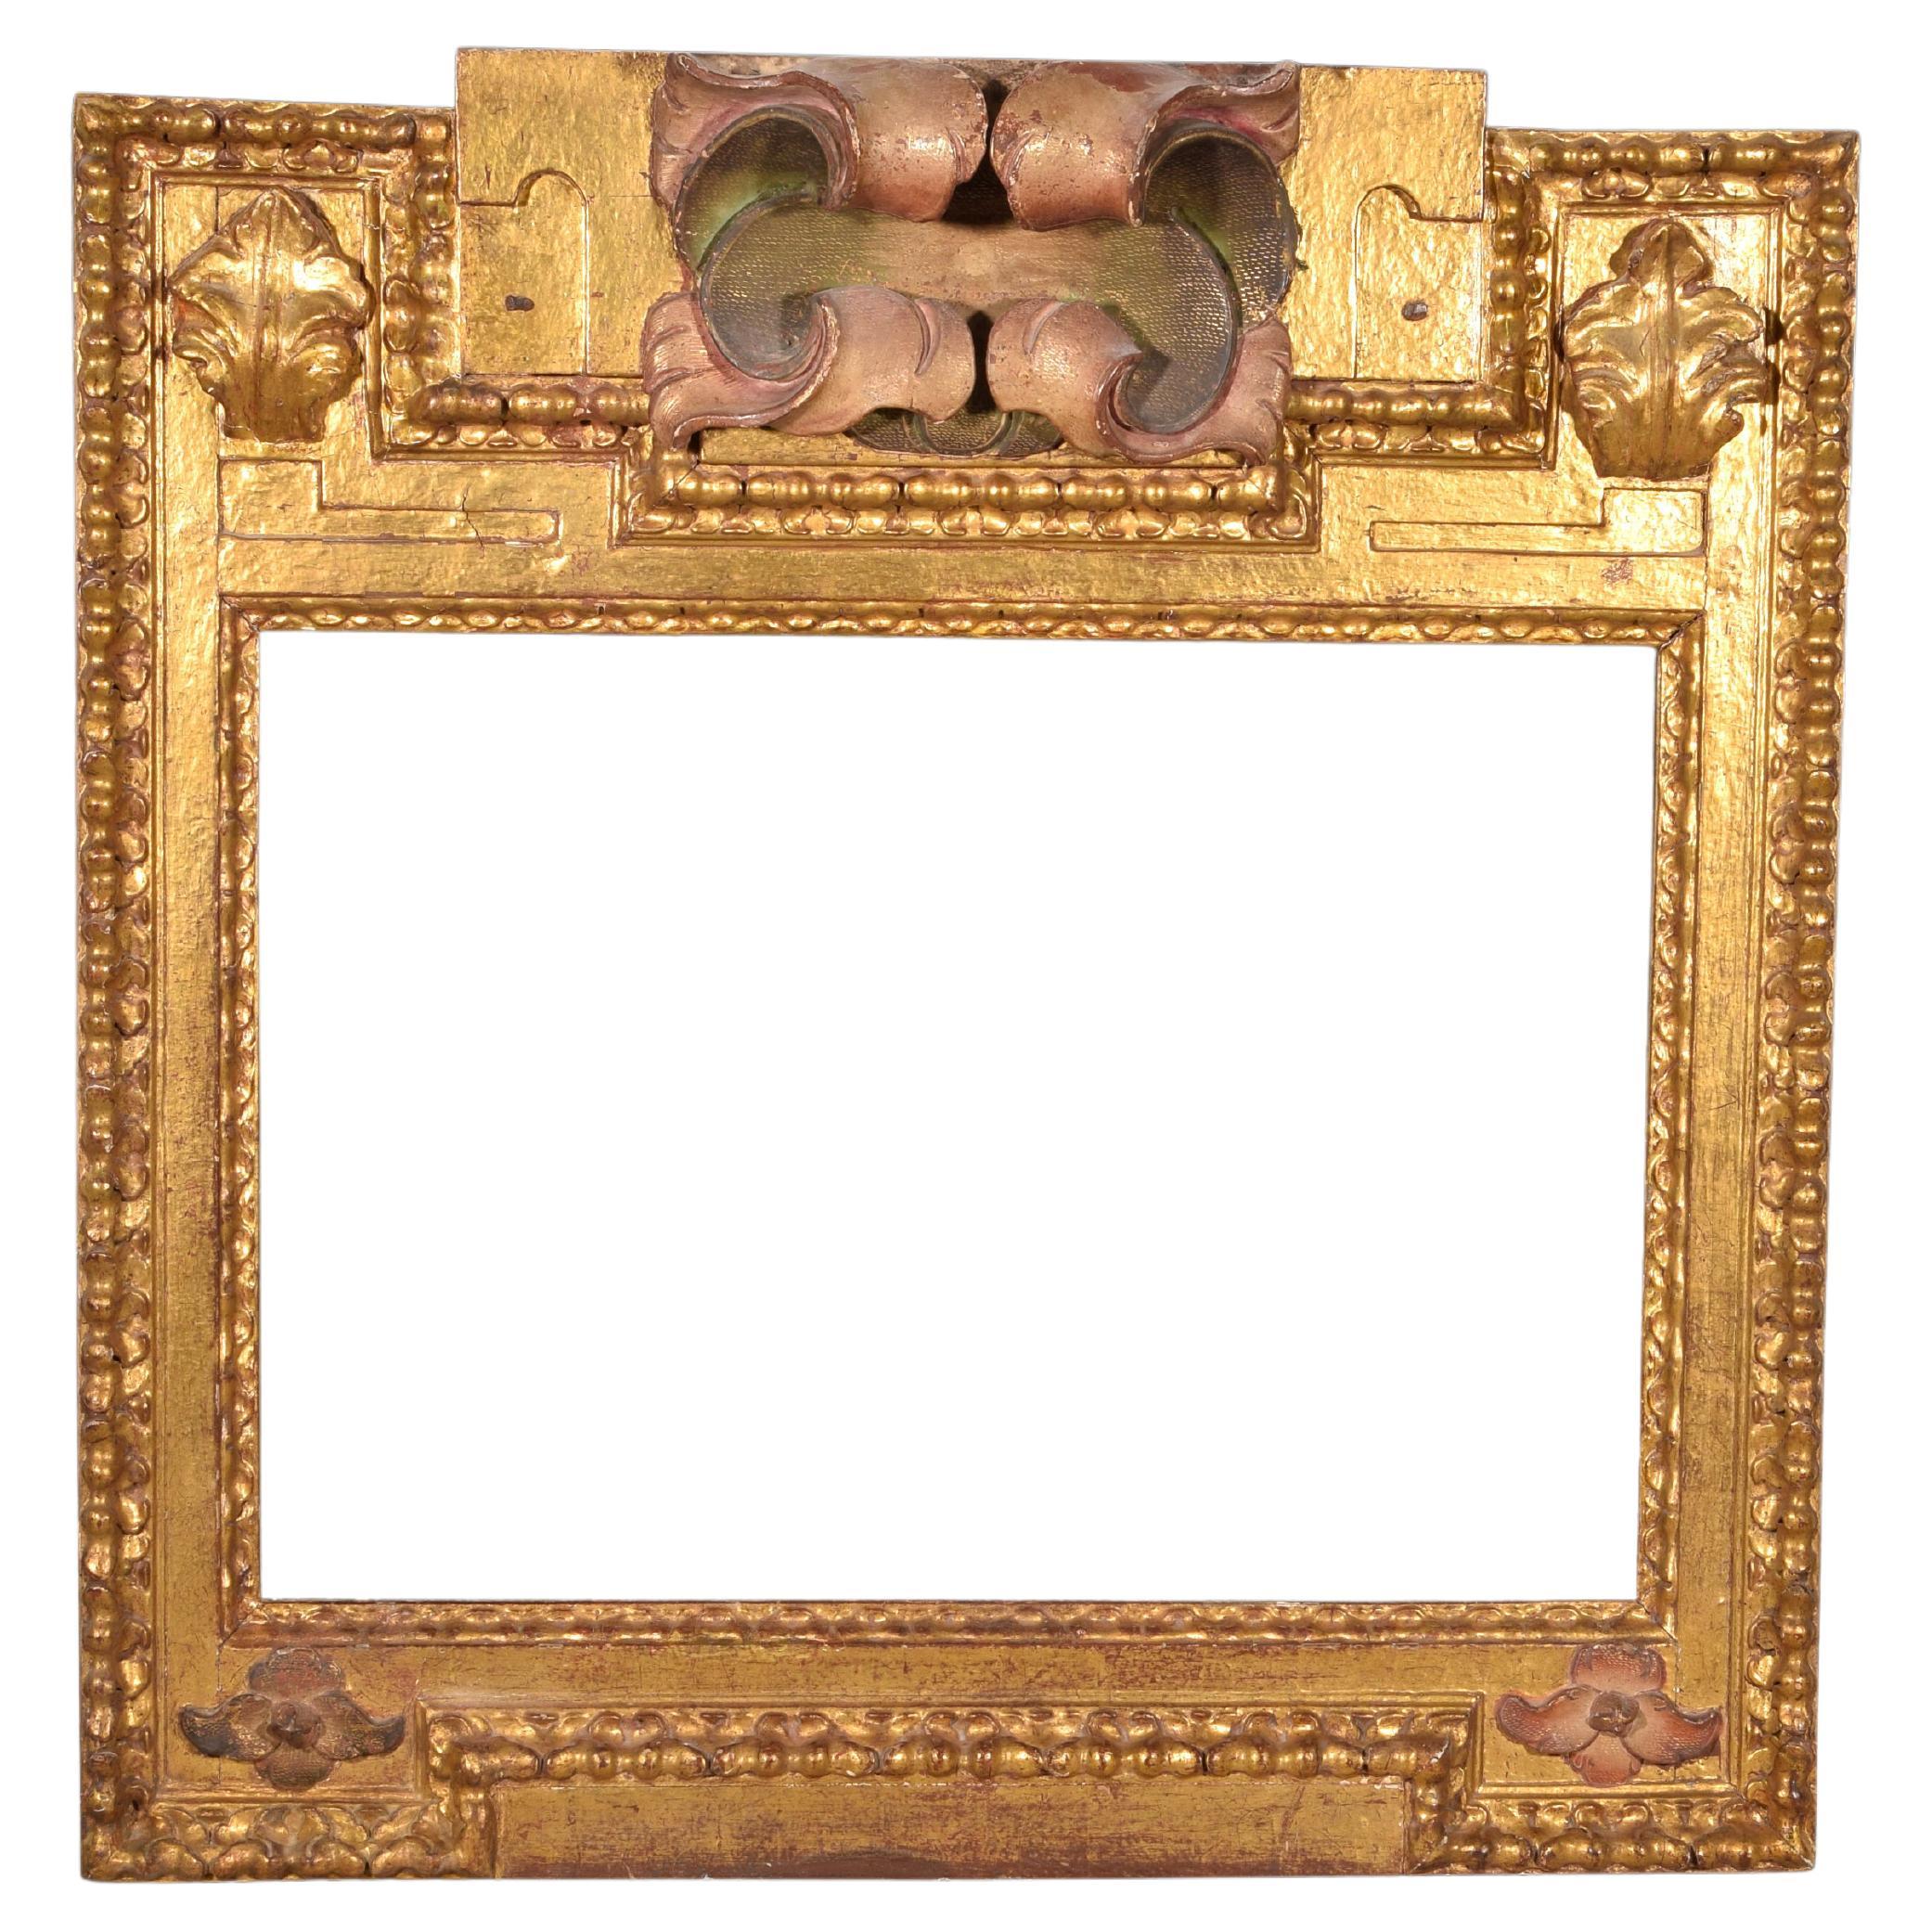 Polychromed and Gilded Wood Frame, Spain, 17th Century